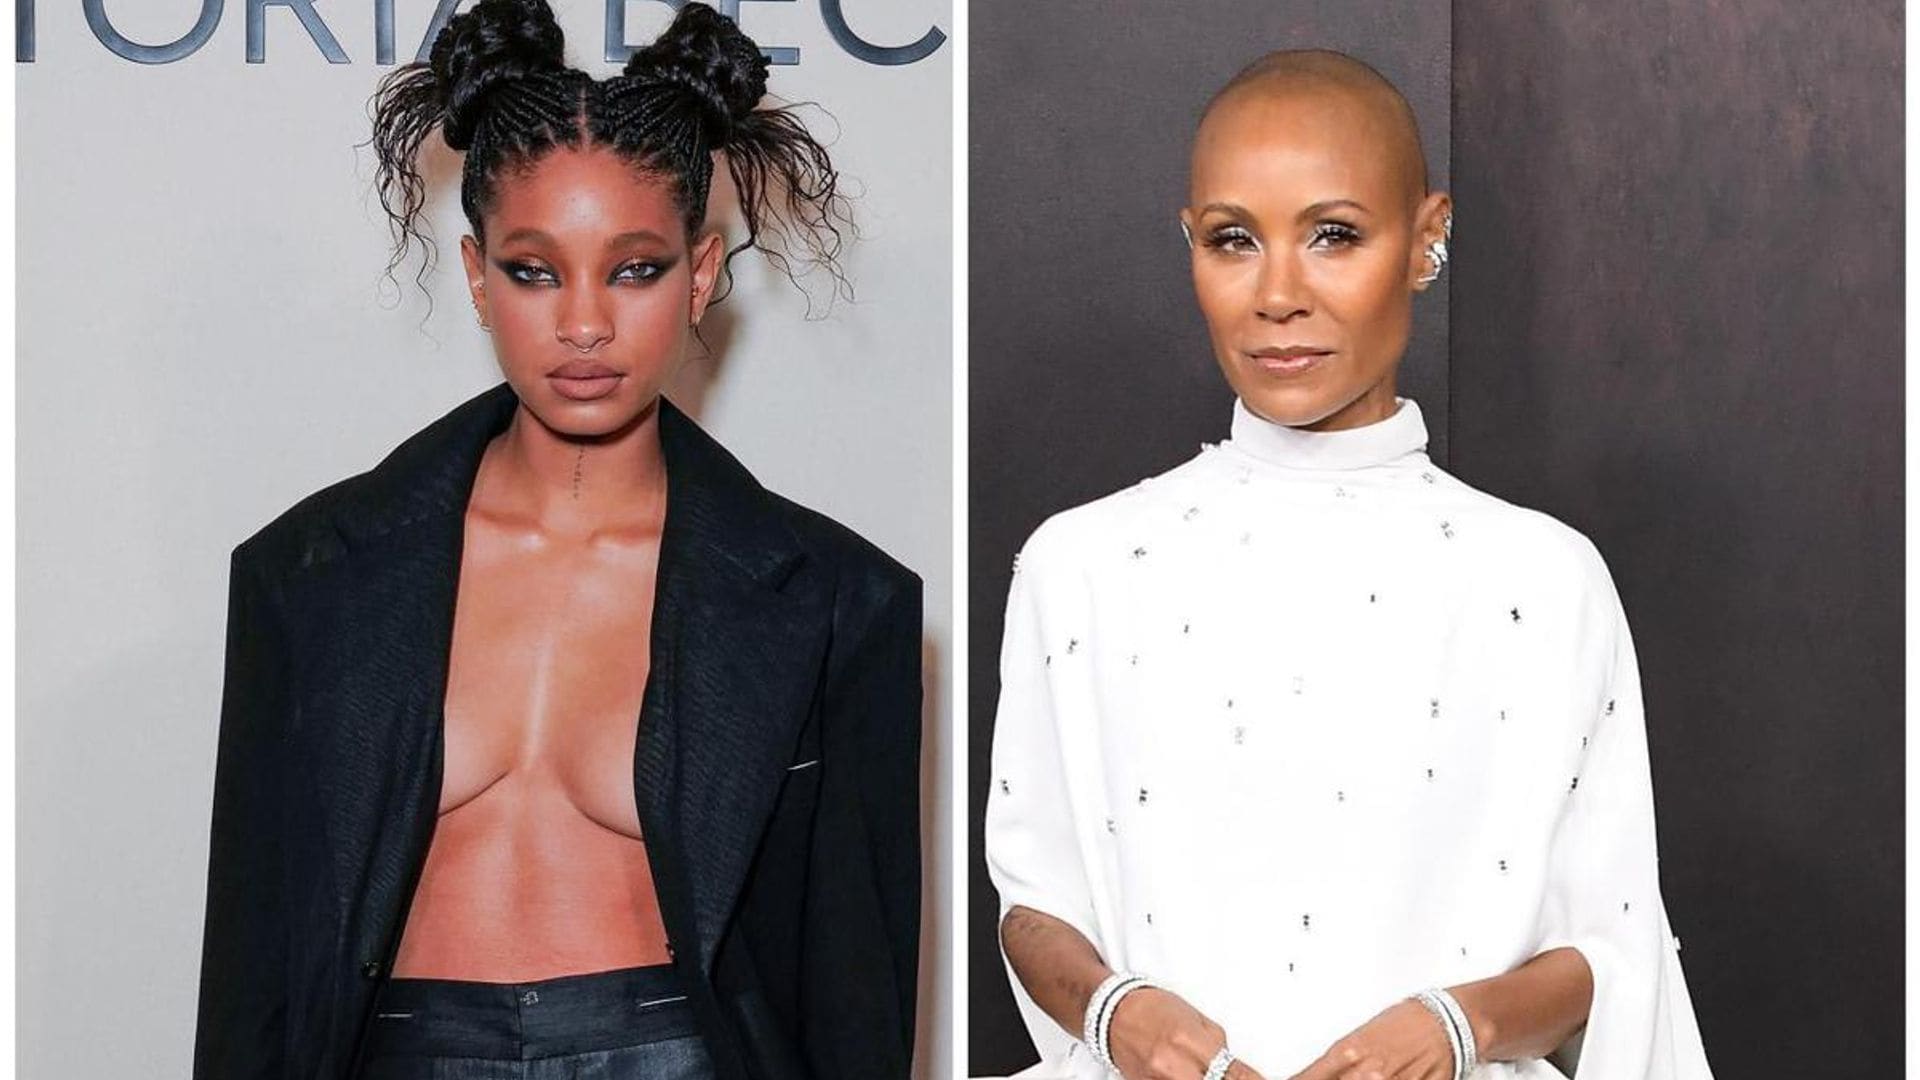 Jada Pinkett Smith, Emily Estefan, and more congratulate Willow on the release of her new song